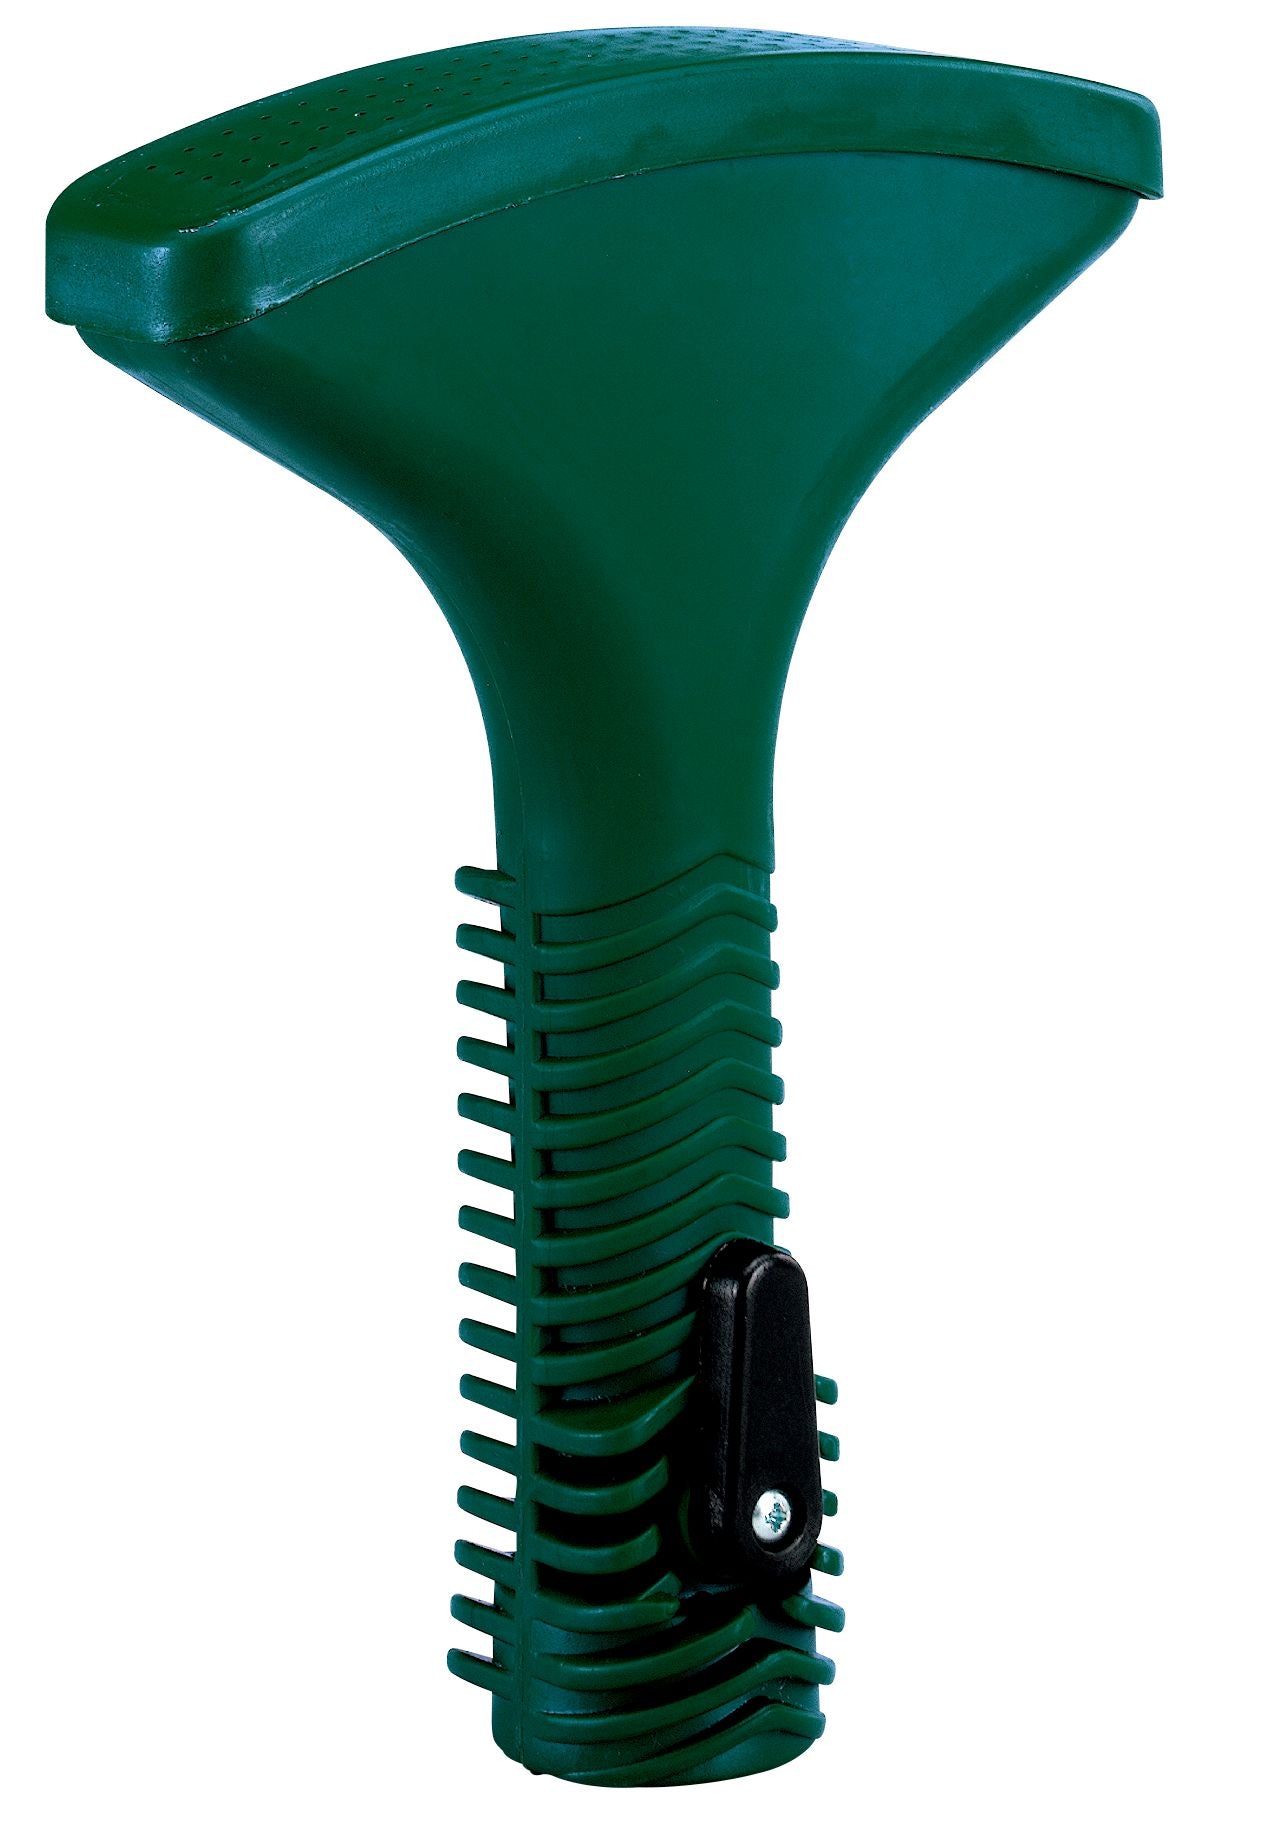 Green plastic fan spray shower nozzle with shut-off lever and spike.